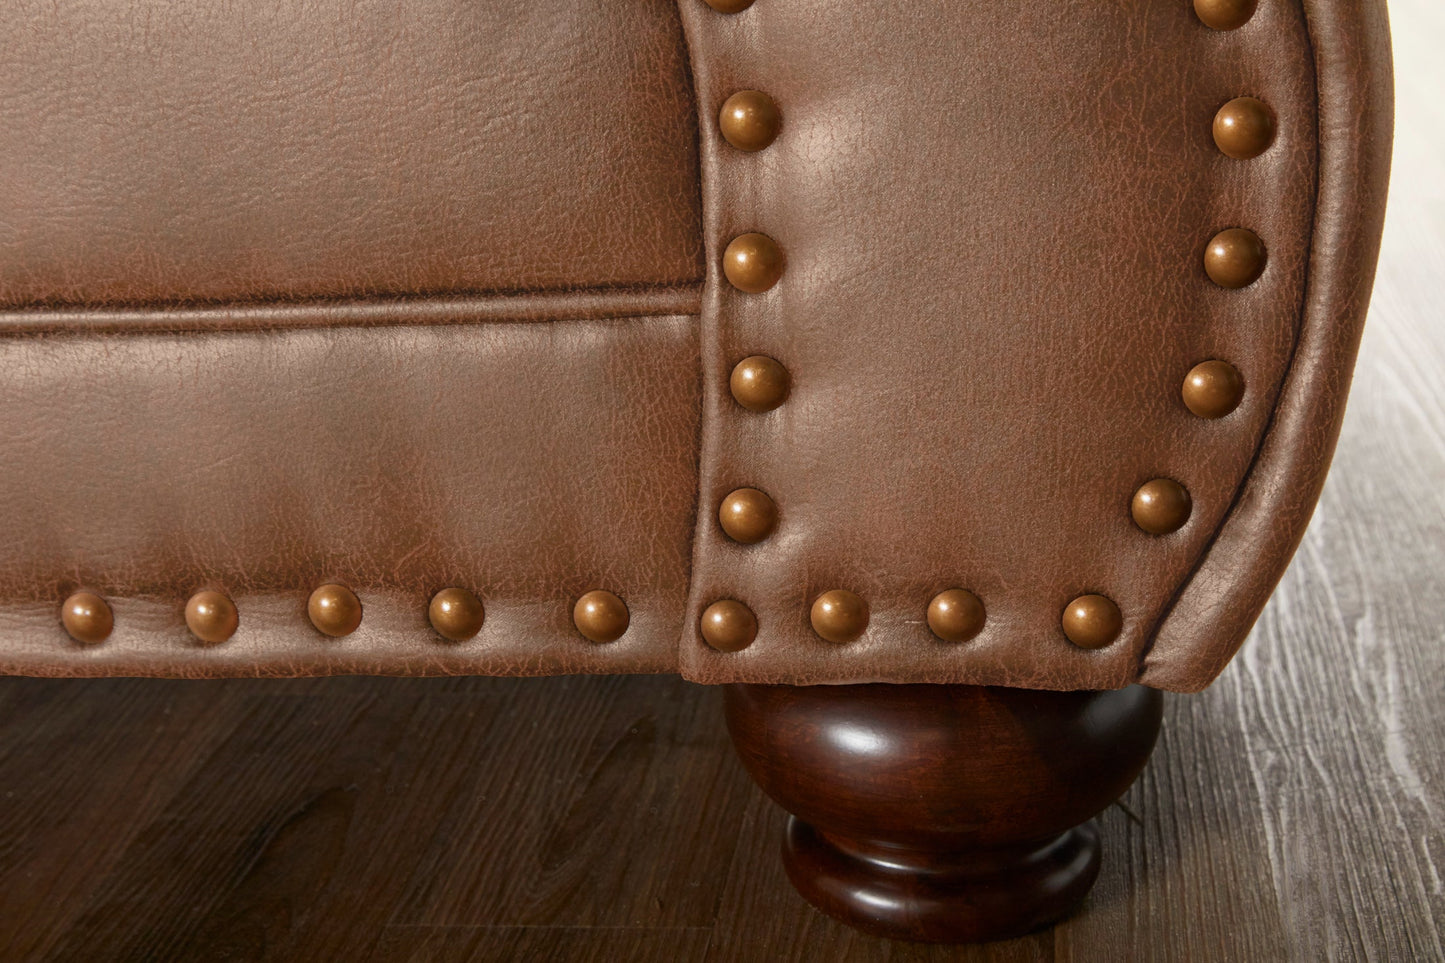 Leinster Faux Leather Sofa with Antique Bronze Nailheads in Jetson Ginger